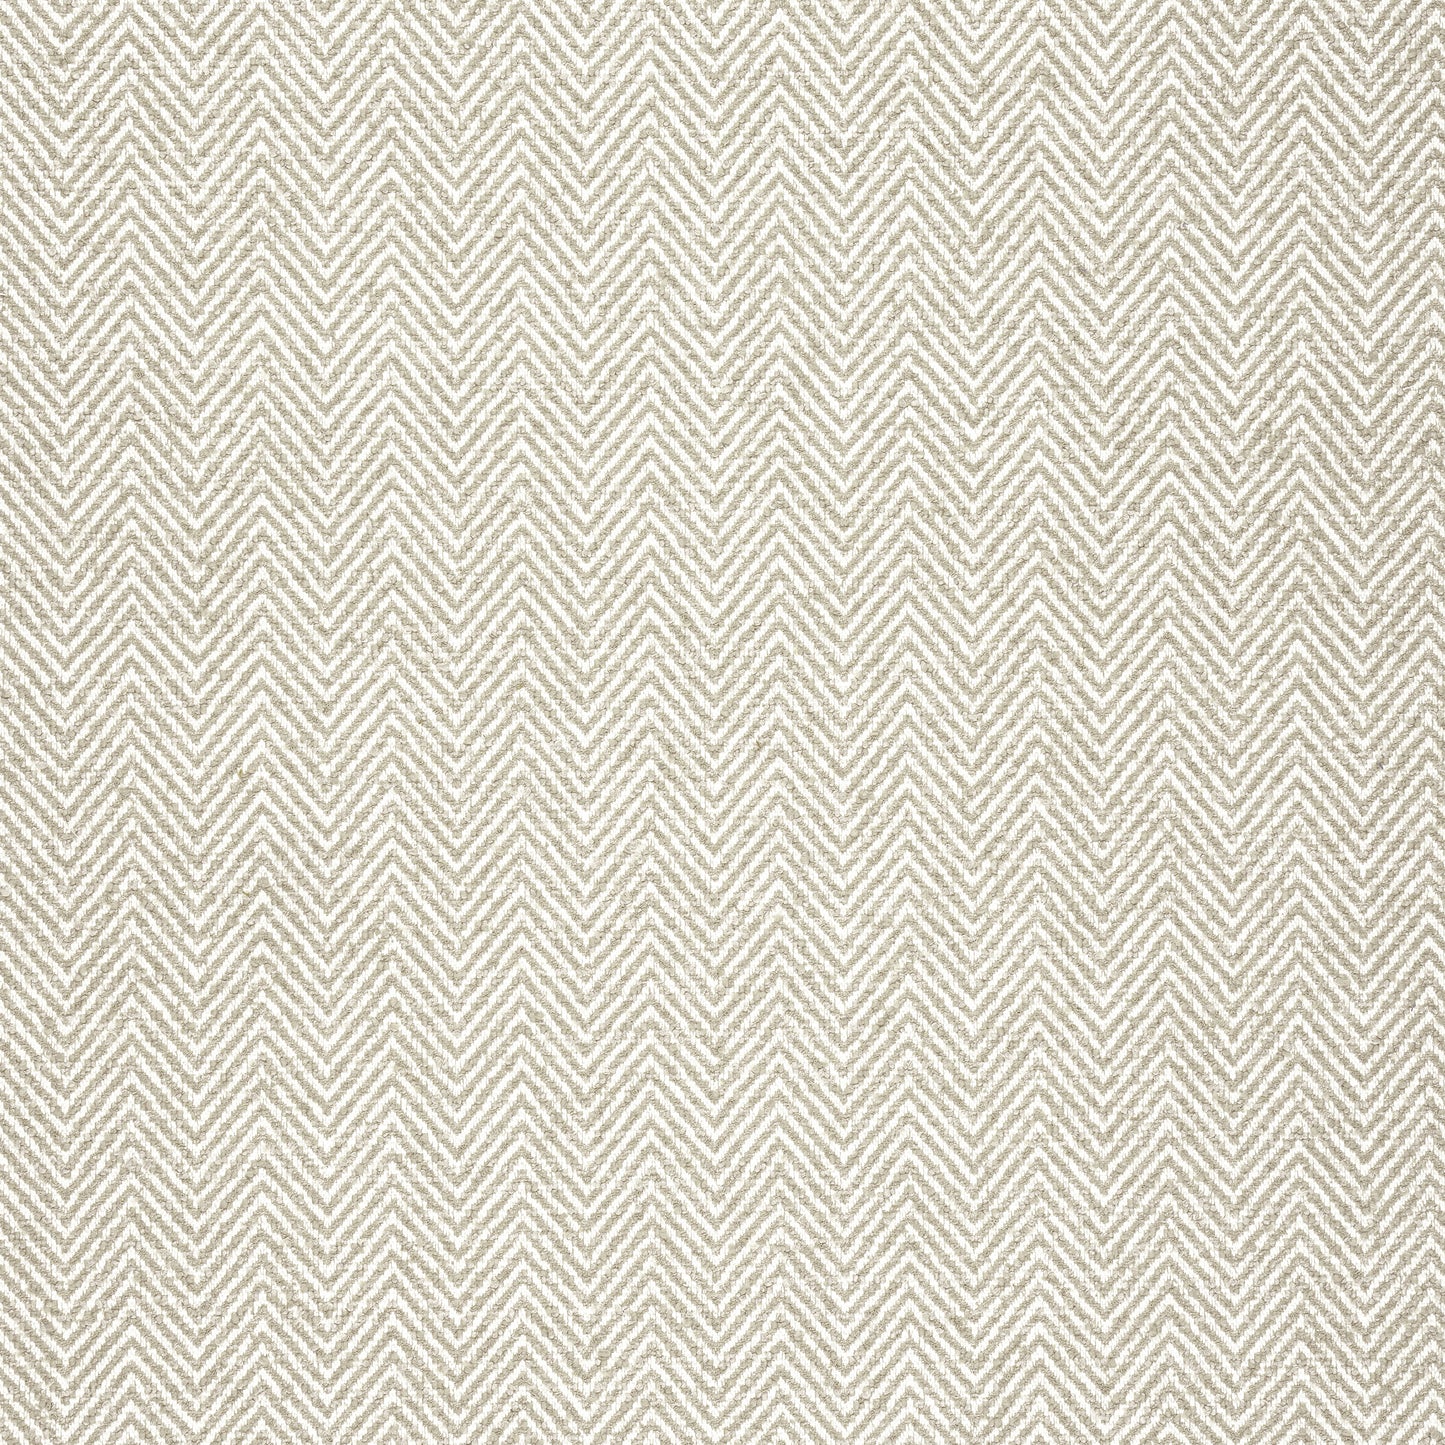 Purchase Thibaut Fabric SKU# W77125 pattern name Monviso color Grey